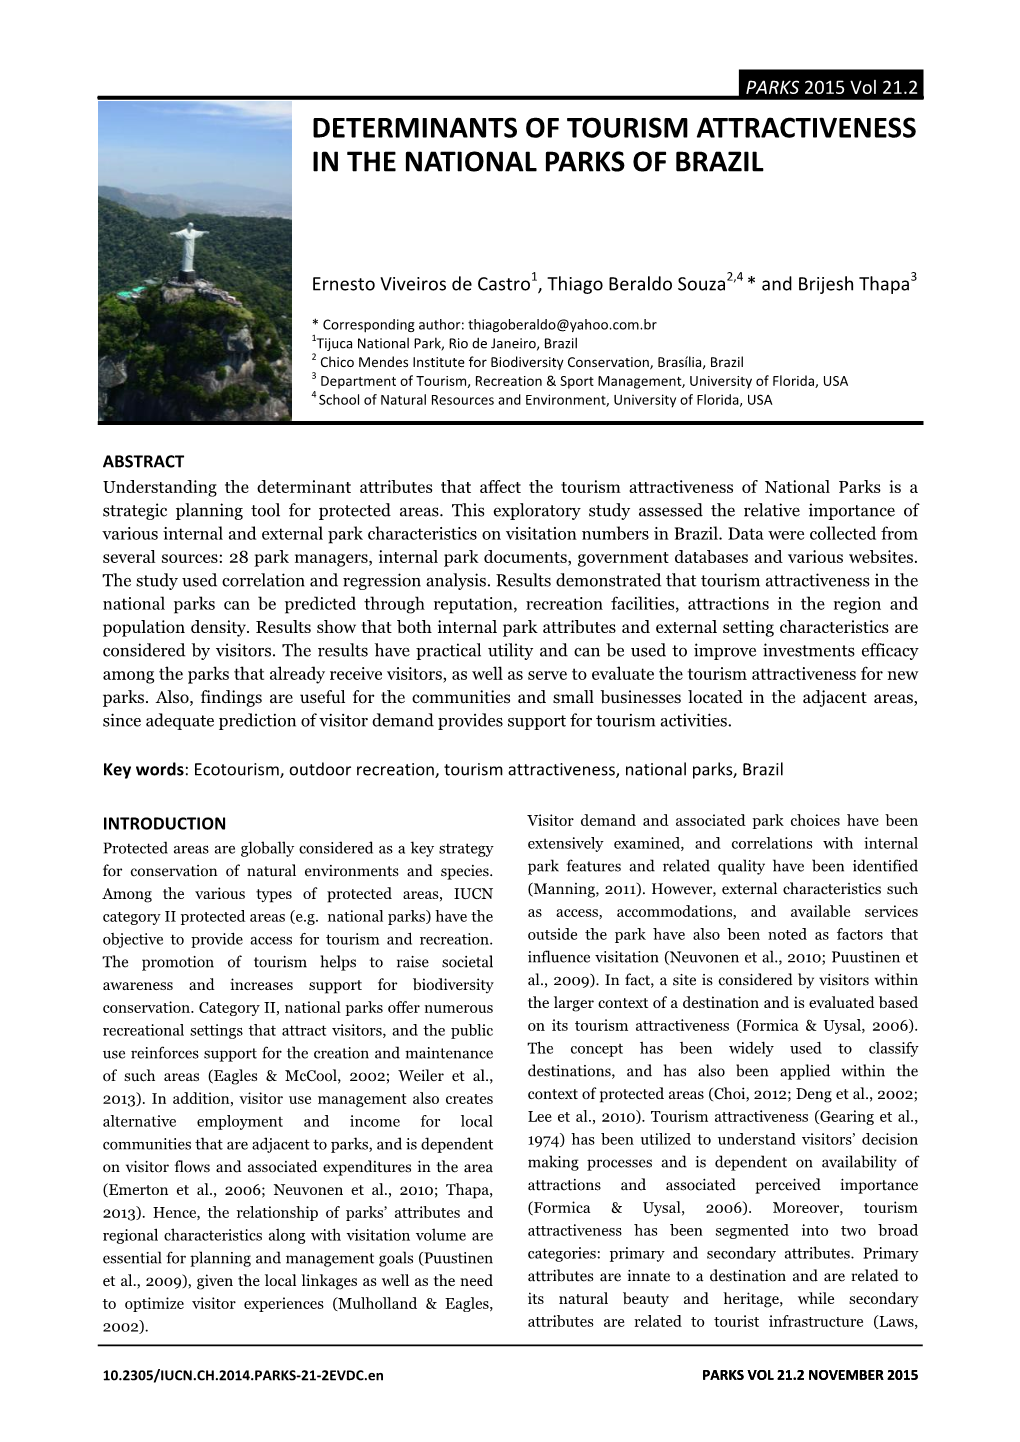 Determinants of Tourism Attractiveness in the National Parks of Brazil